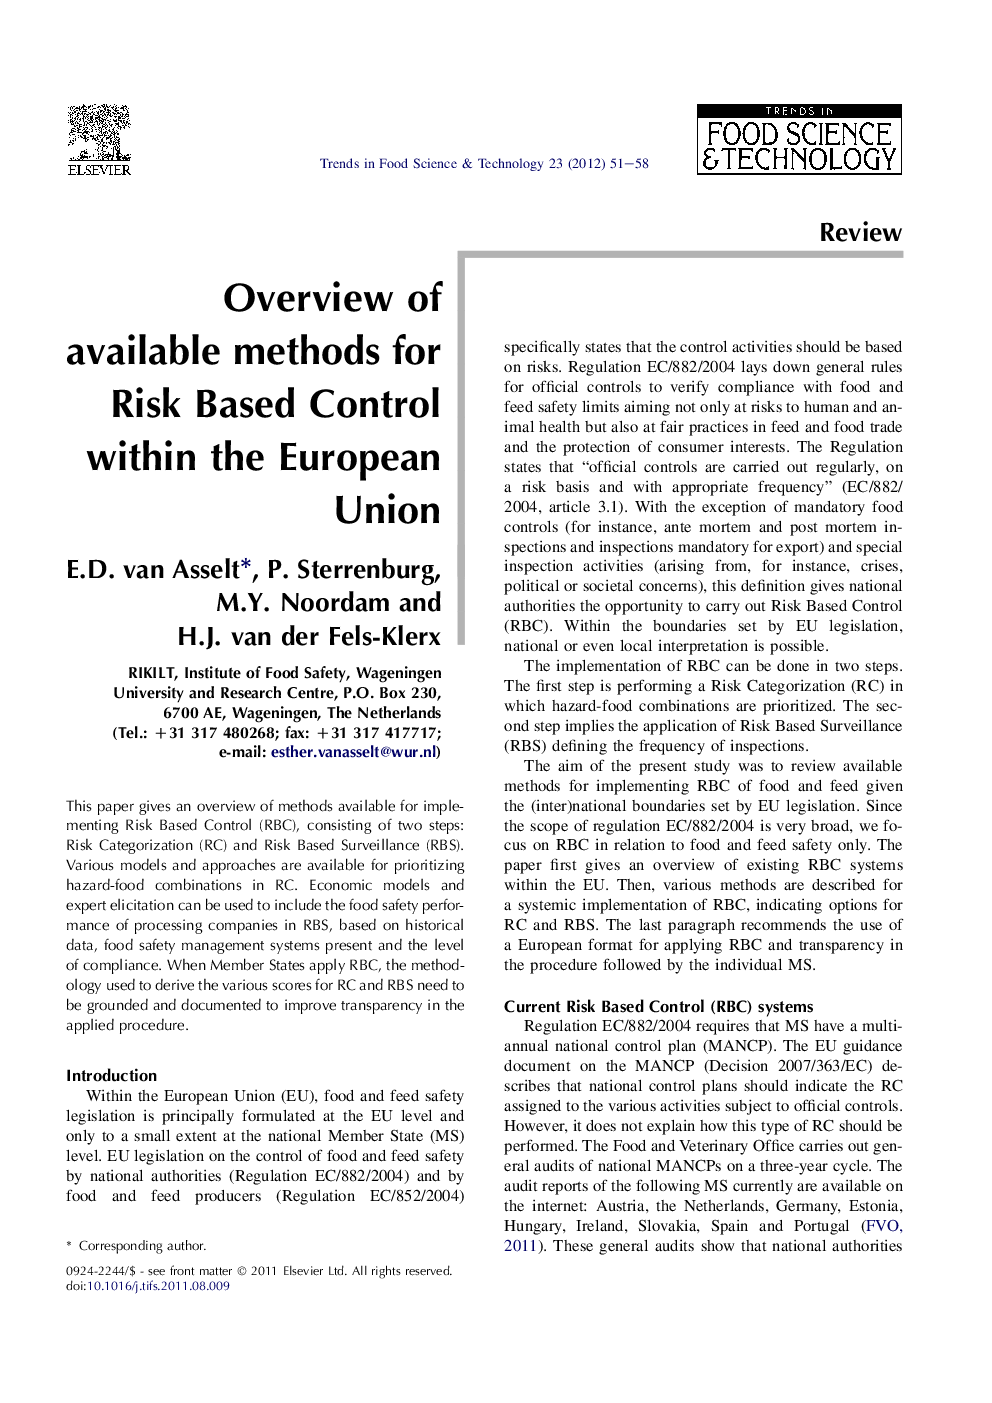 Overview of available methods for Risk Based Control within the European Union